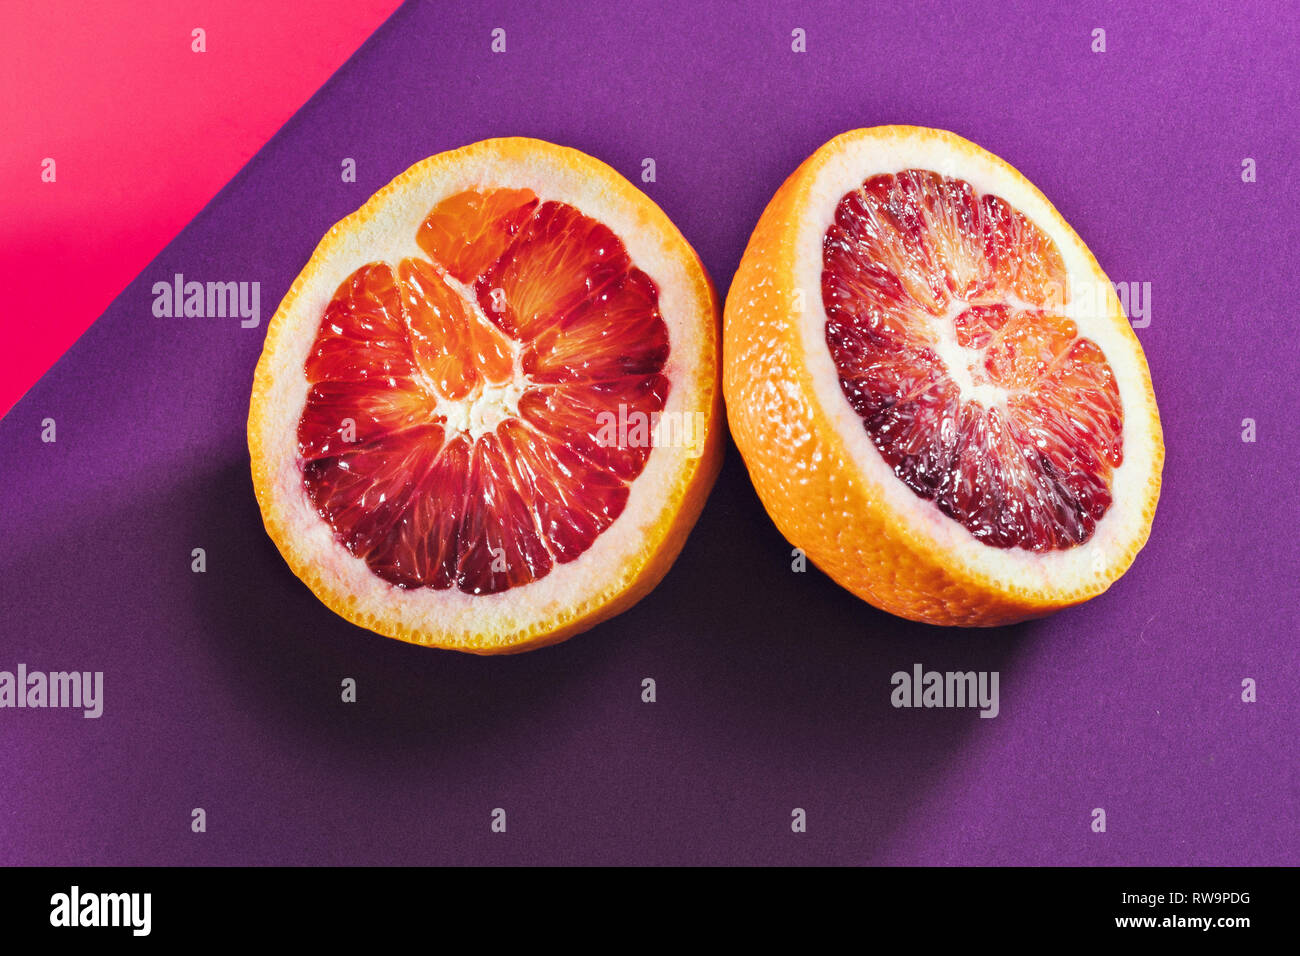 A graphic still life of a sliced blood orange on a colorful background, photographed with hard light and shadows in studio. Stock Photo